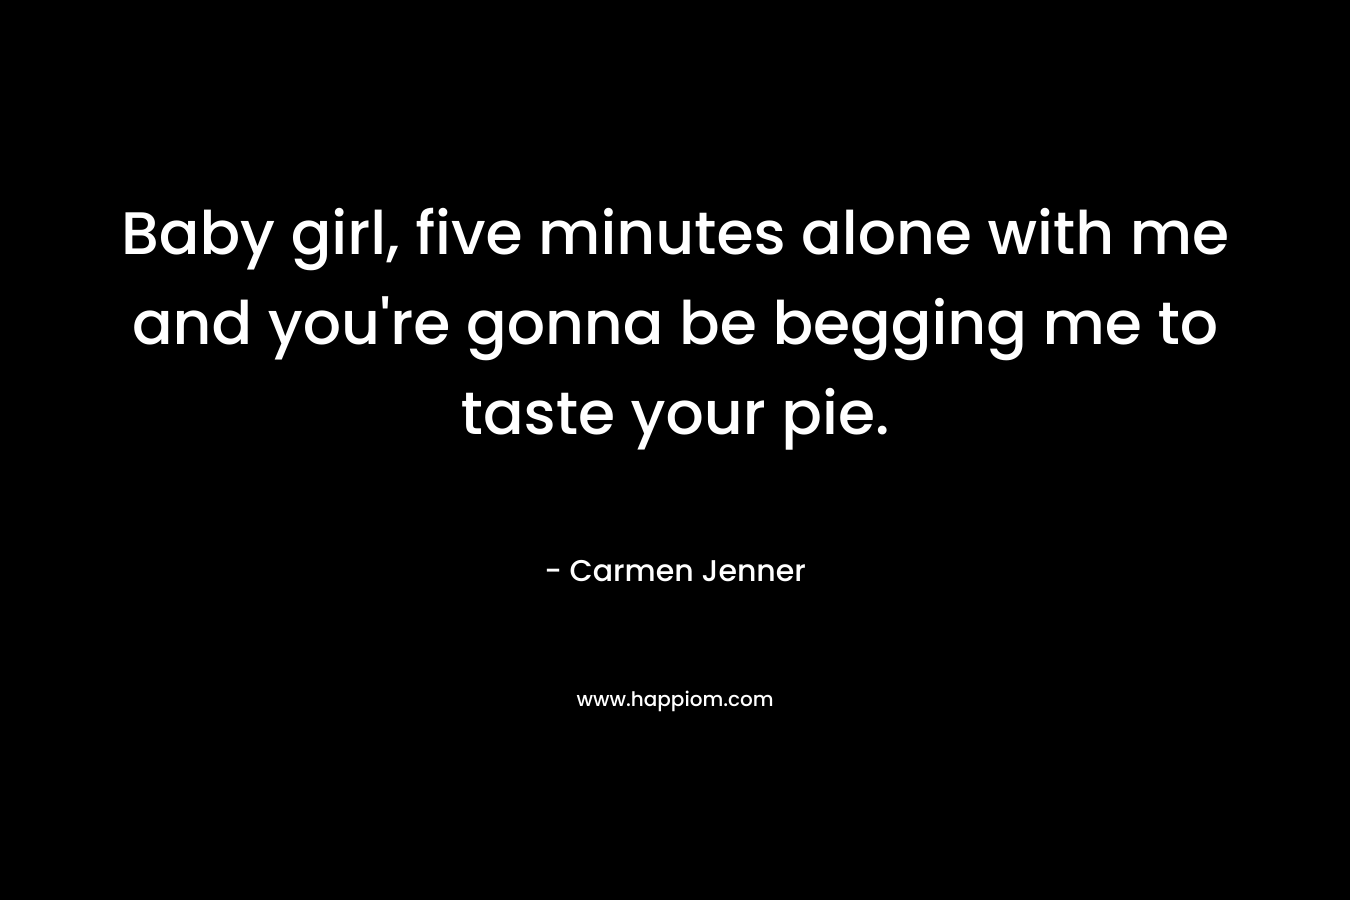 Baby girl, five minutes alone with me and you’re gonna be begging me to taste your pie. – Carmen Jenner